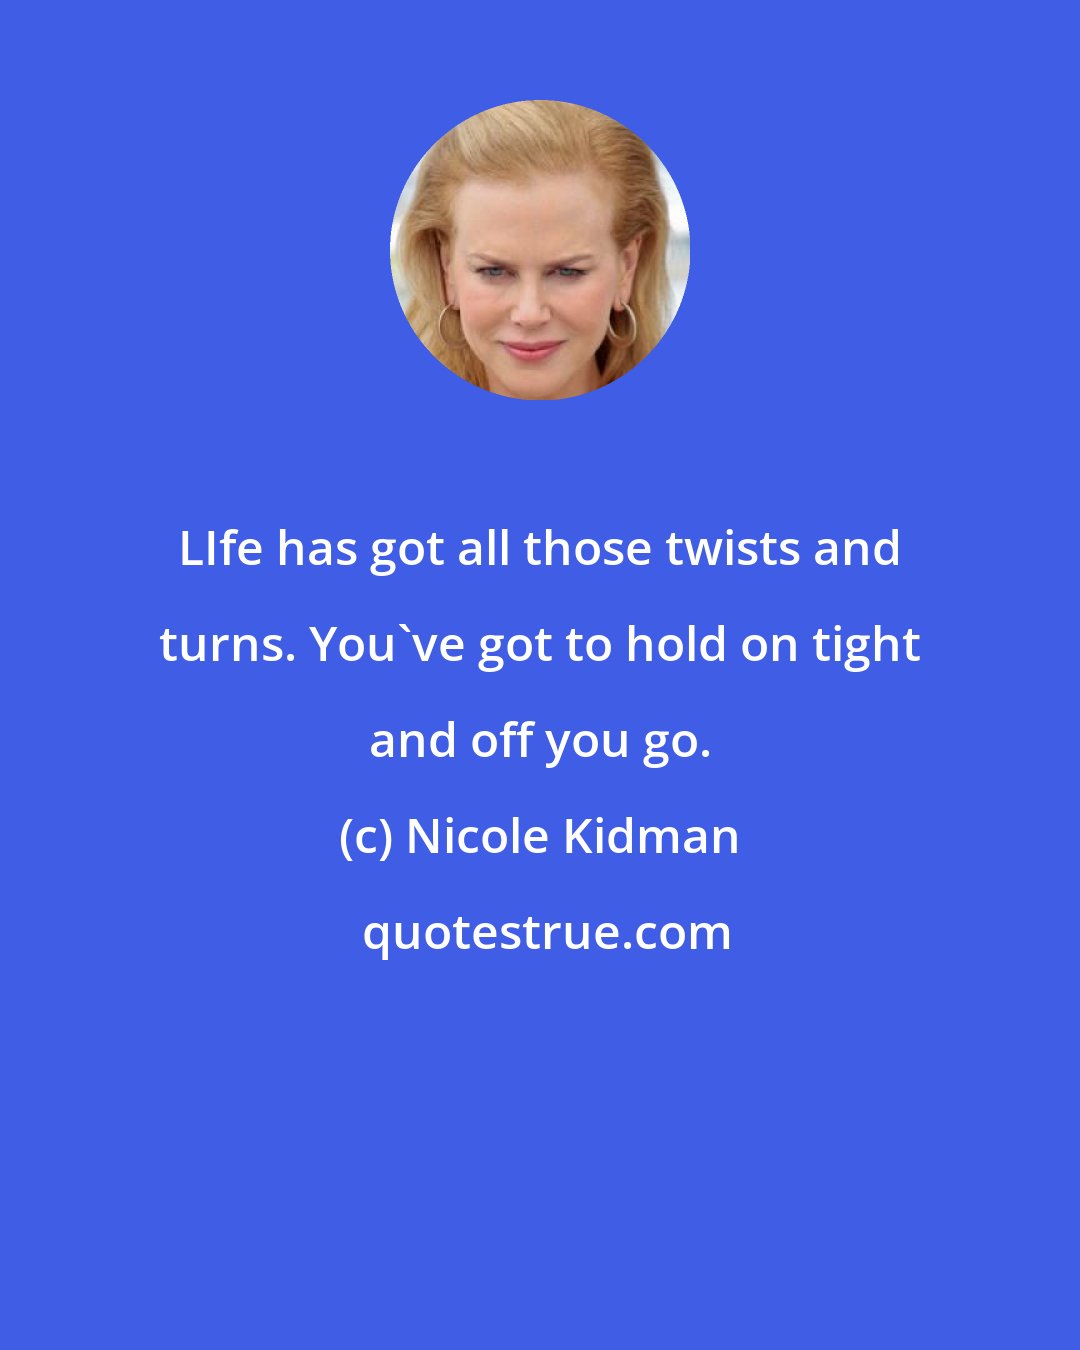 Nicole Kidman: LIfe has got all those twists and turns. You've got to hold on tight and off you go.